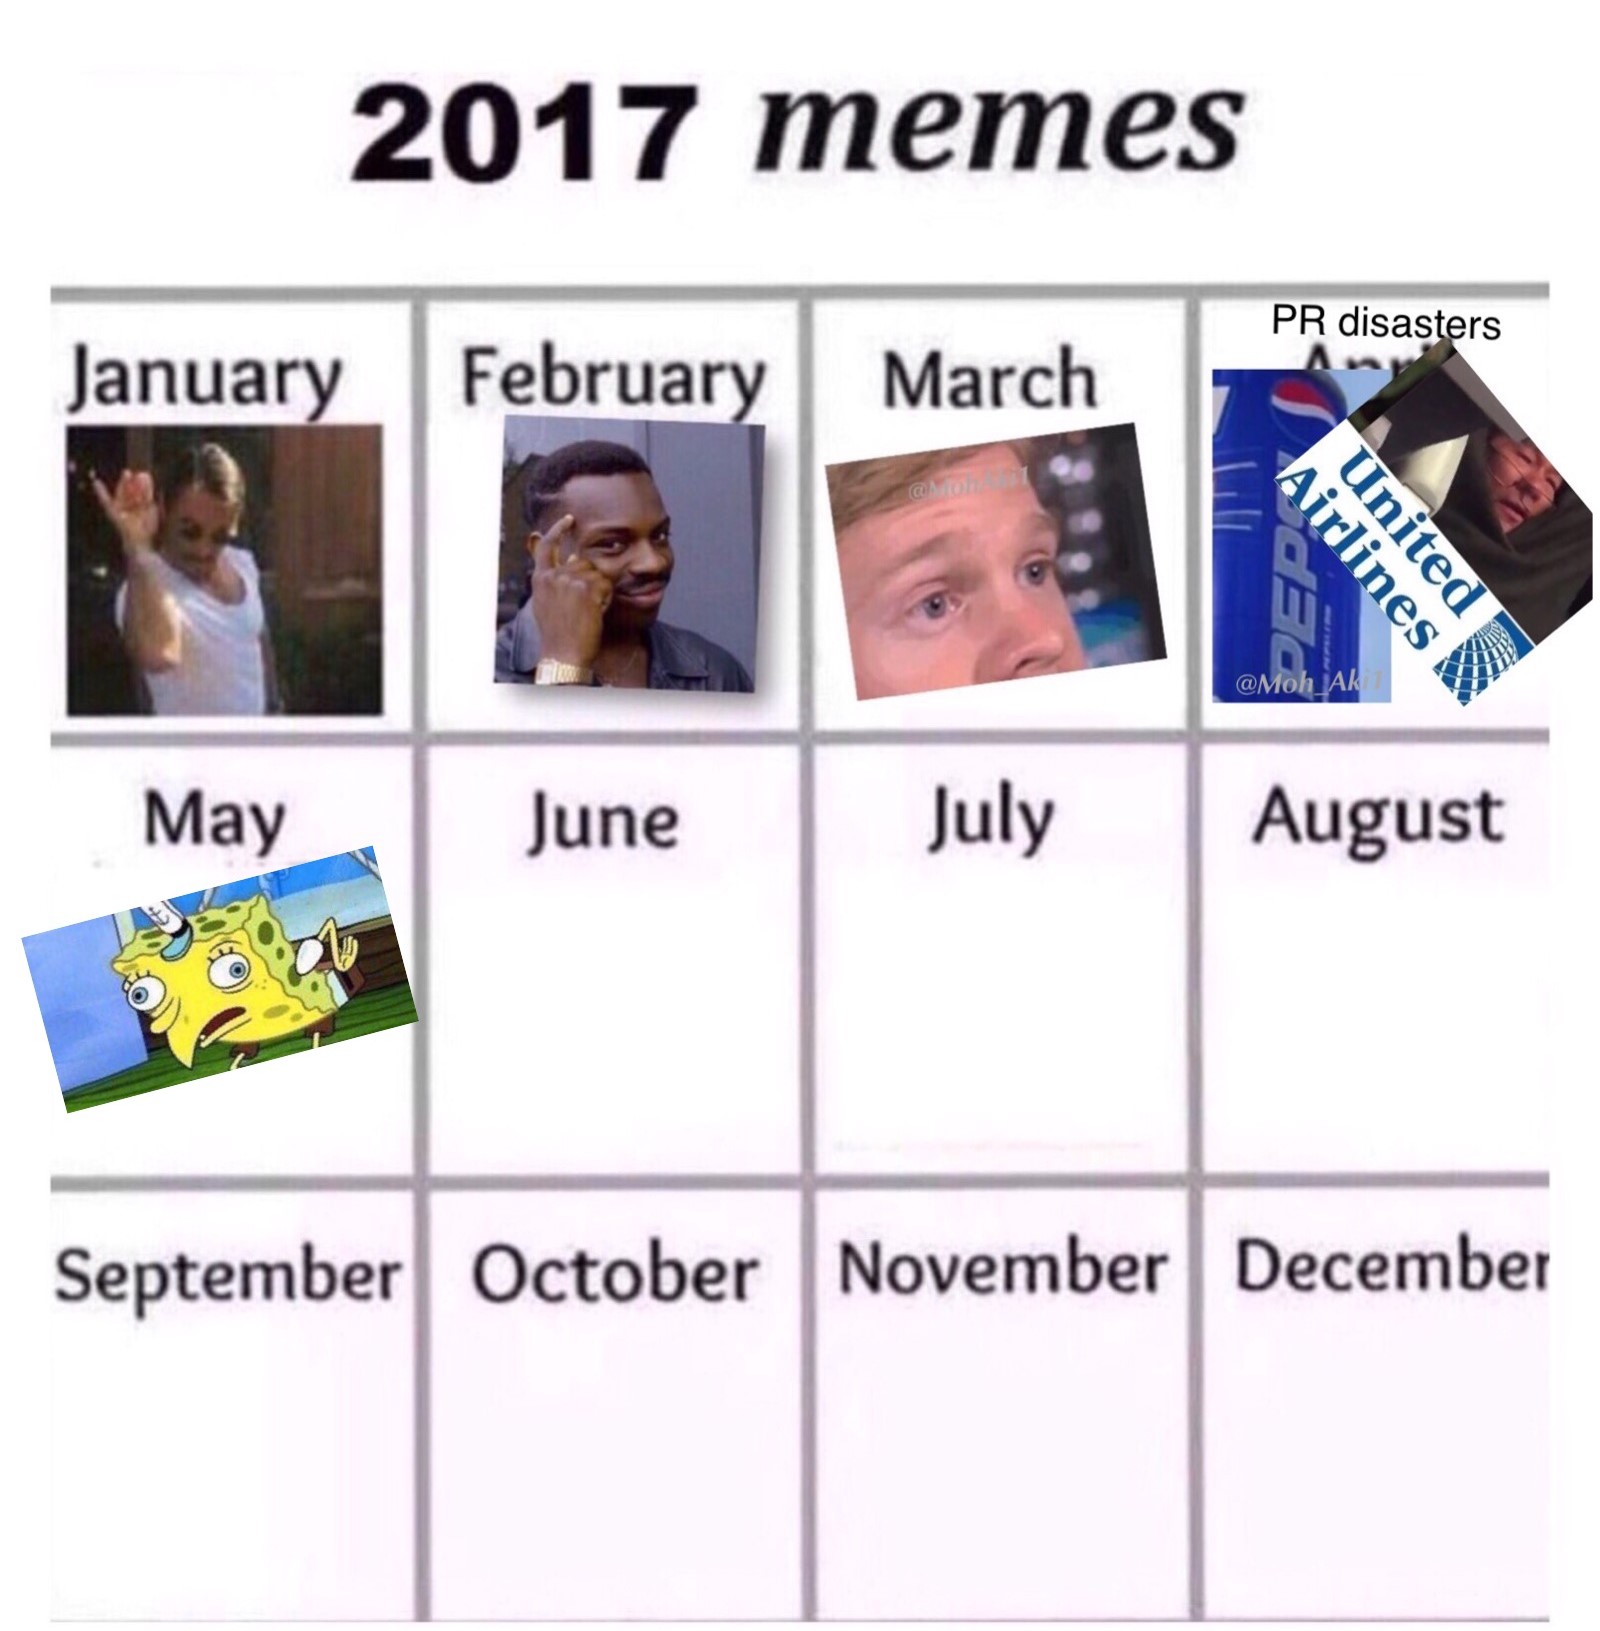 memes of 2017 - 2017 memes Pr disasters January February March Airlines United May June July August September October November December